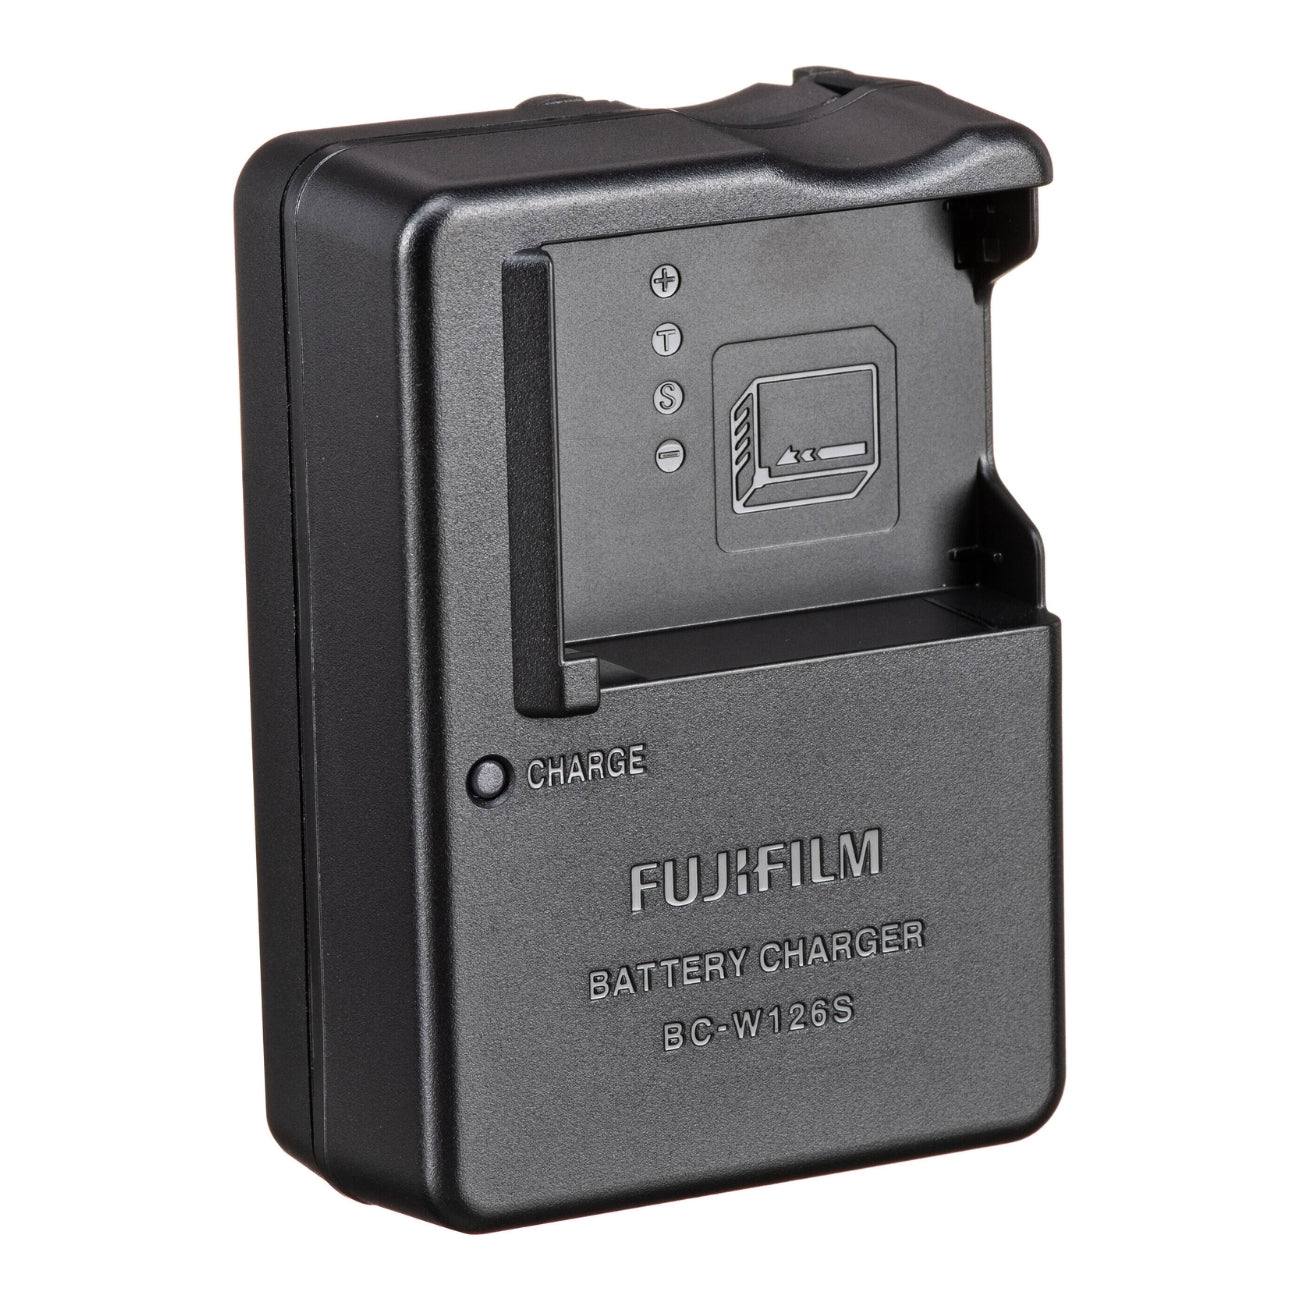 Fujifilm Battery Charger BC-W126S for NP-W126S Li-ion Battery, Black